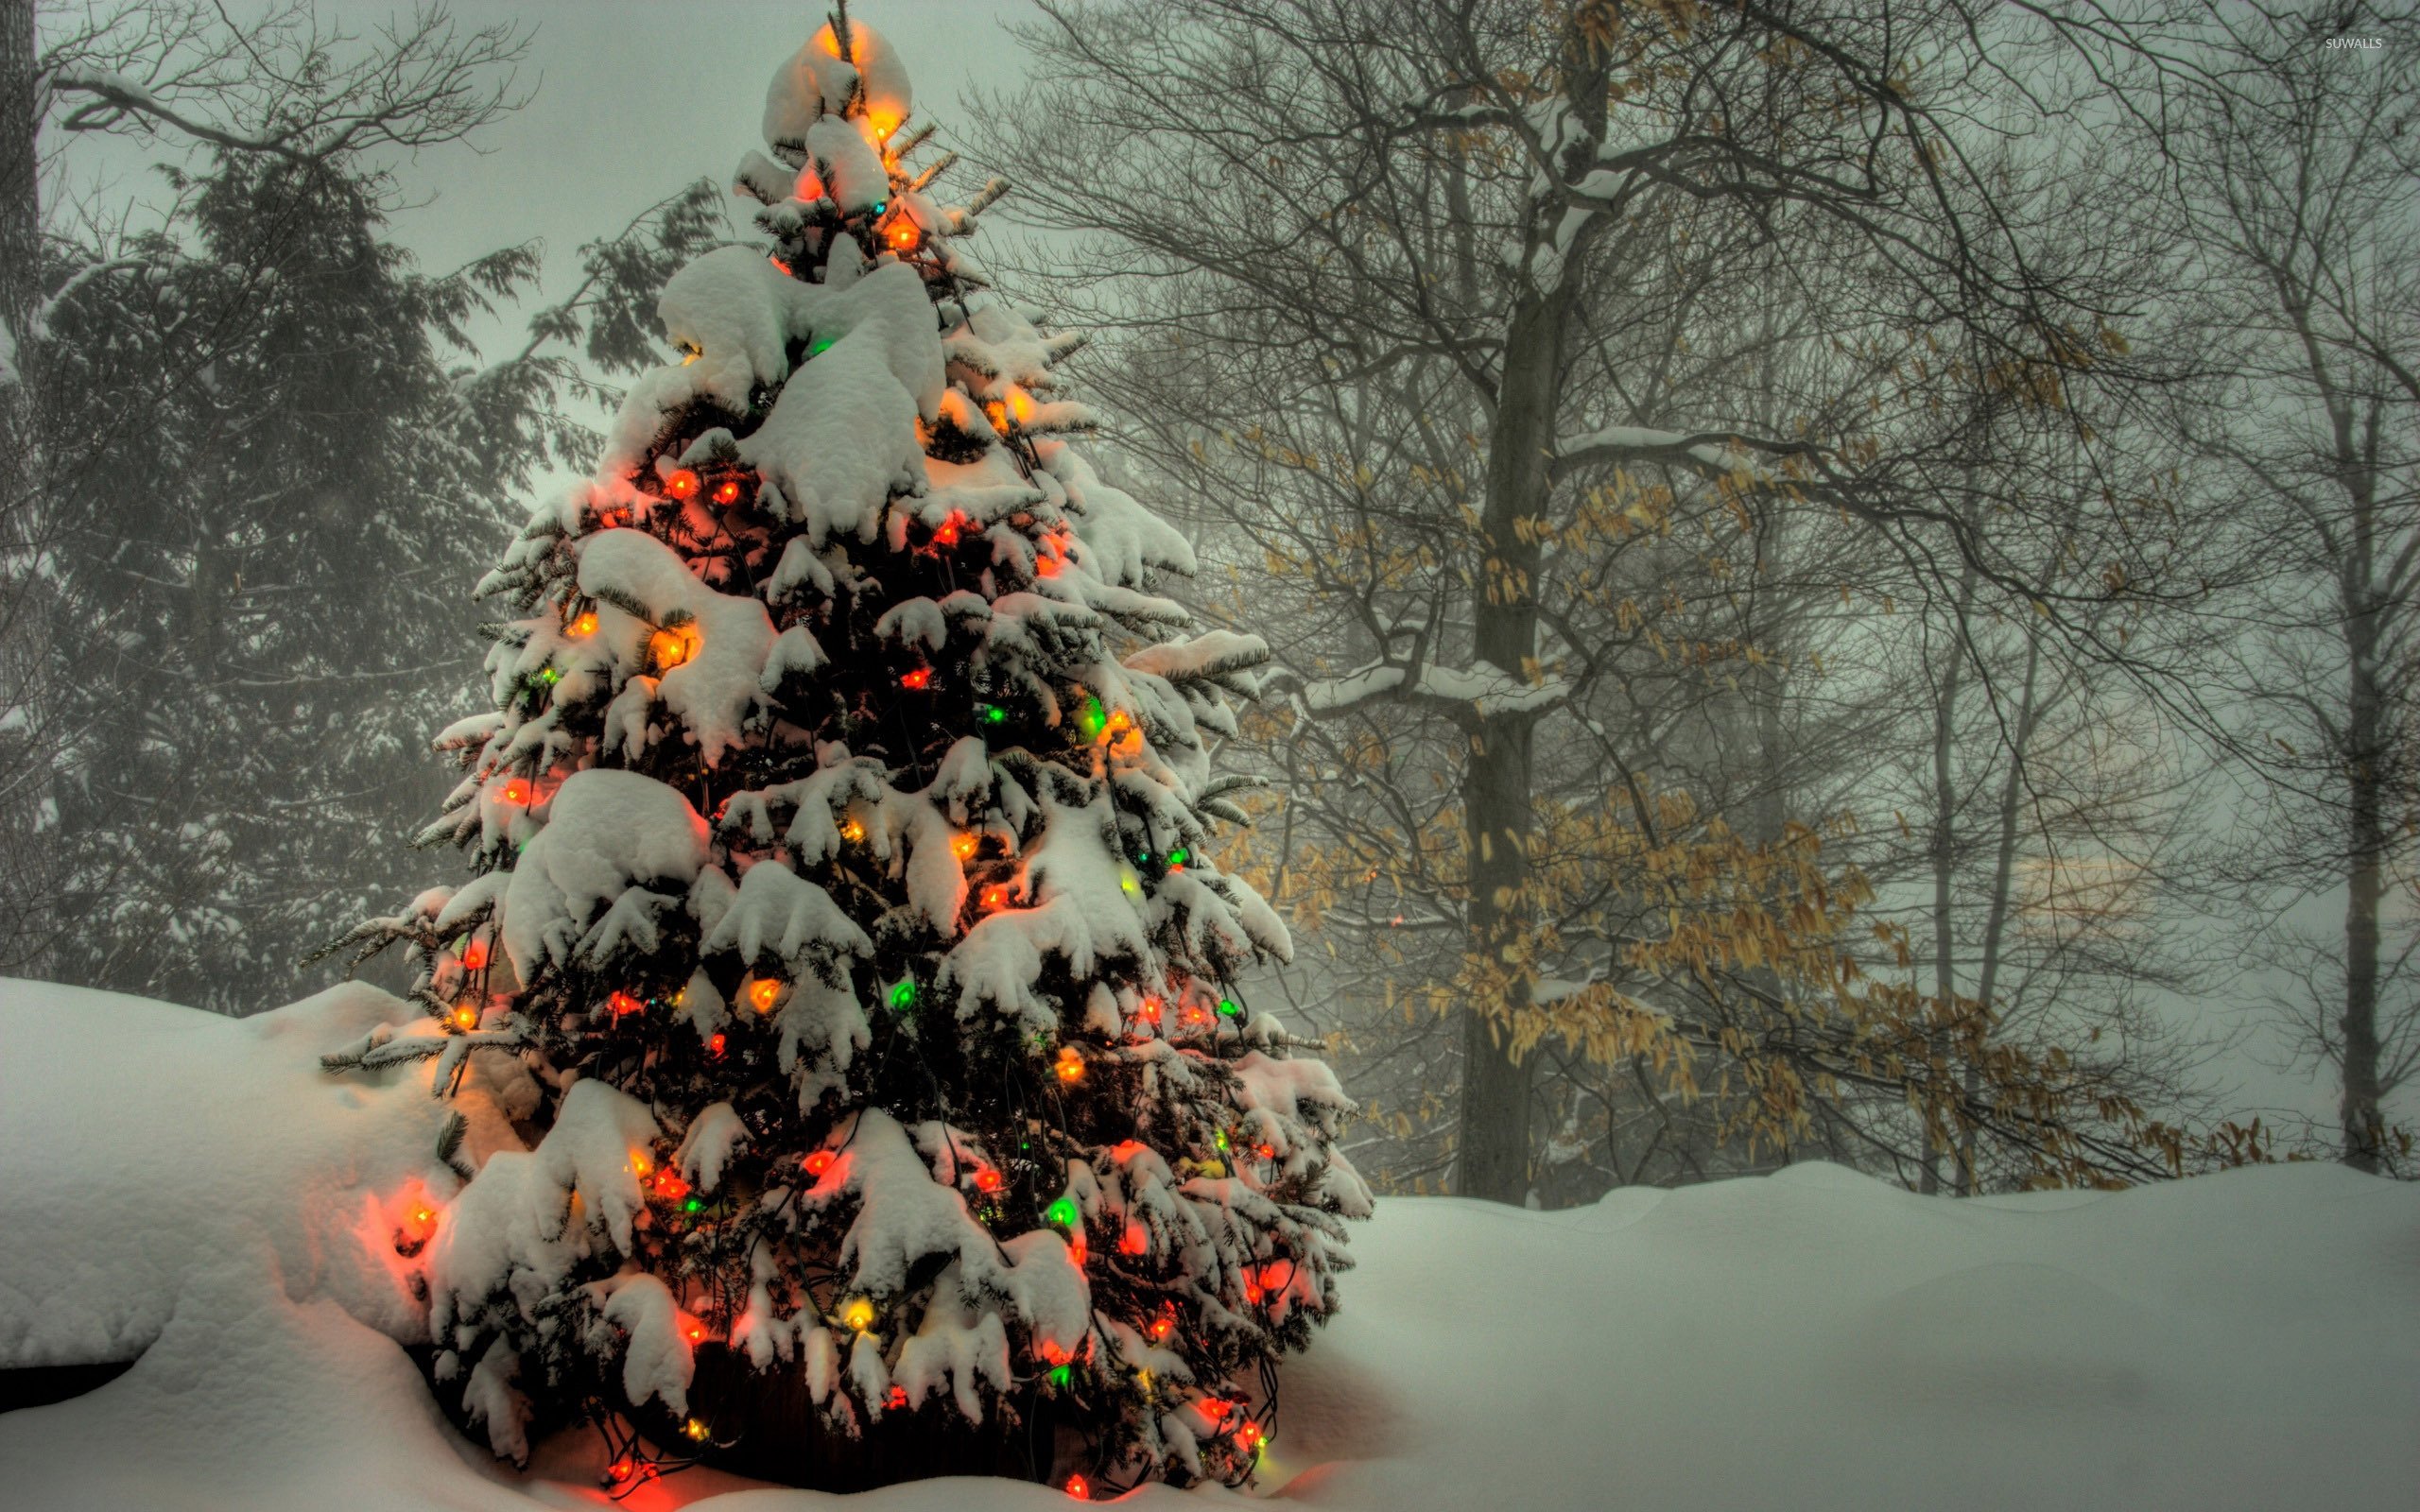 Christmas tree shining in the snowy forest wallpaper wallpaper